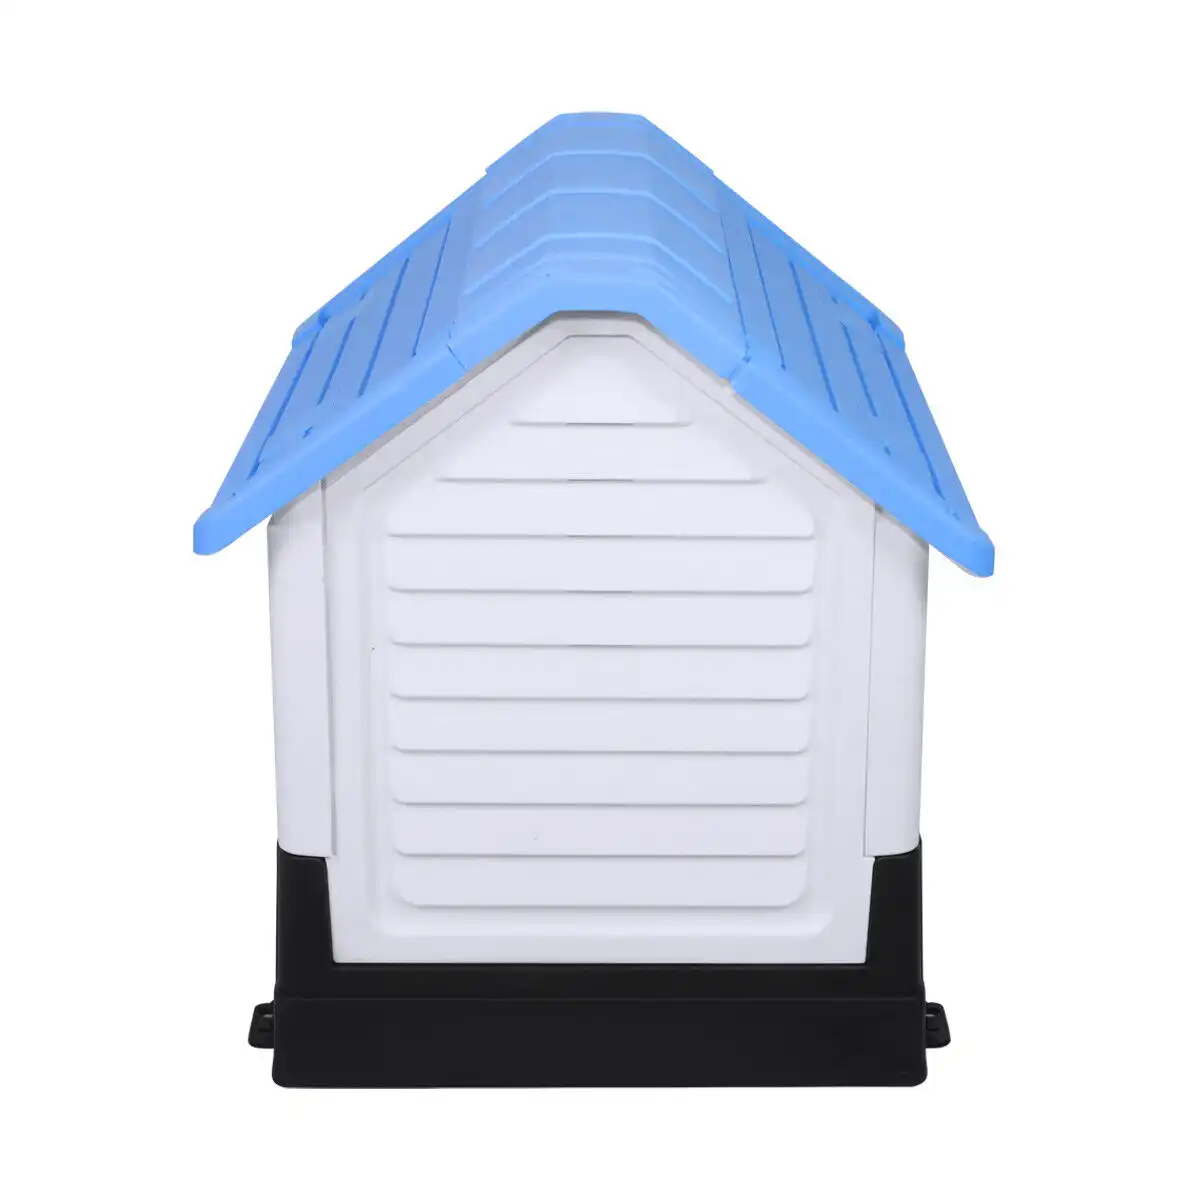 Dog House Waterproof Pet Shelter Puppy Kennel - Up to 25lb